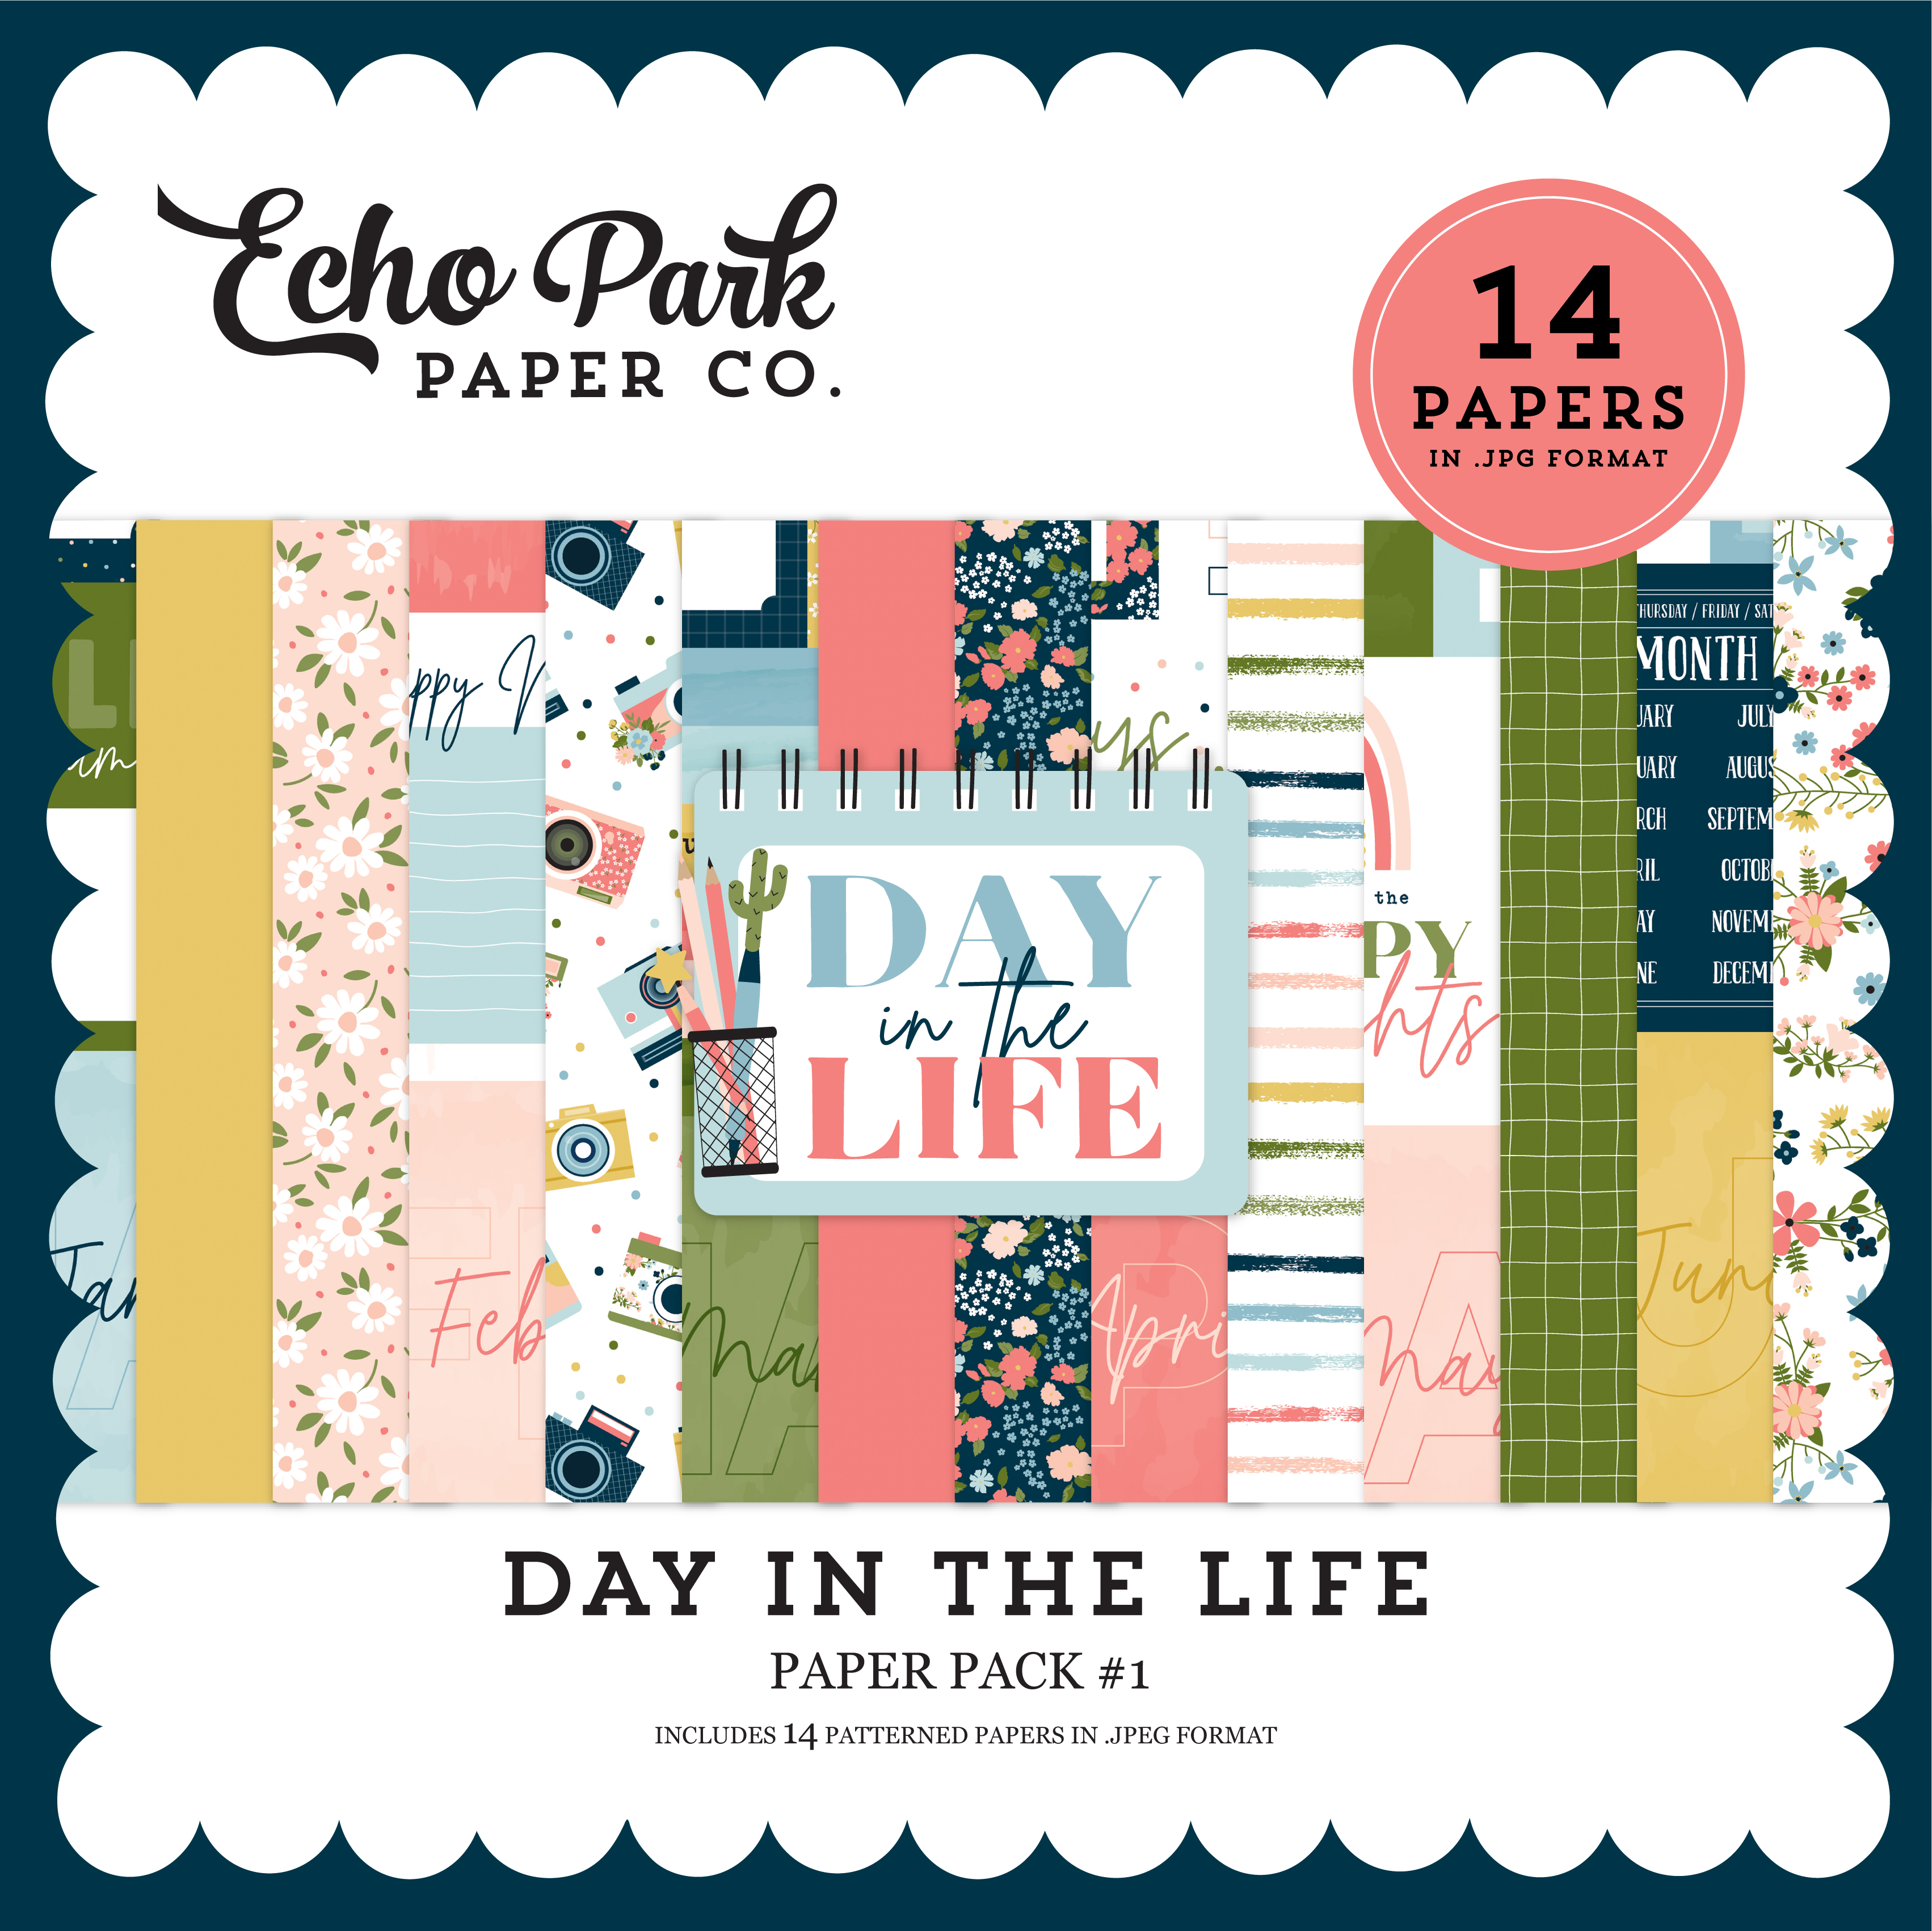 Day In The Life Paper Pack #1